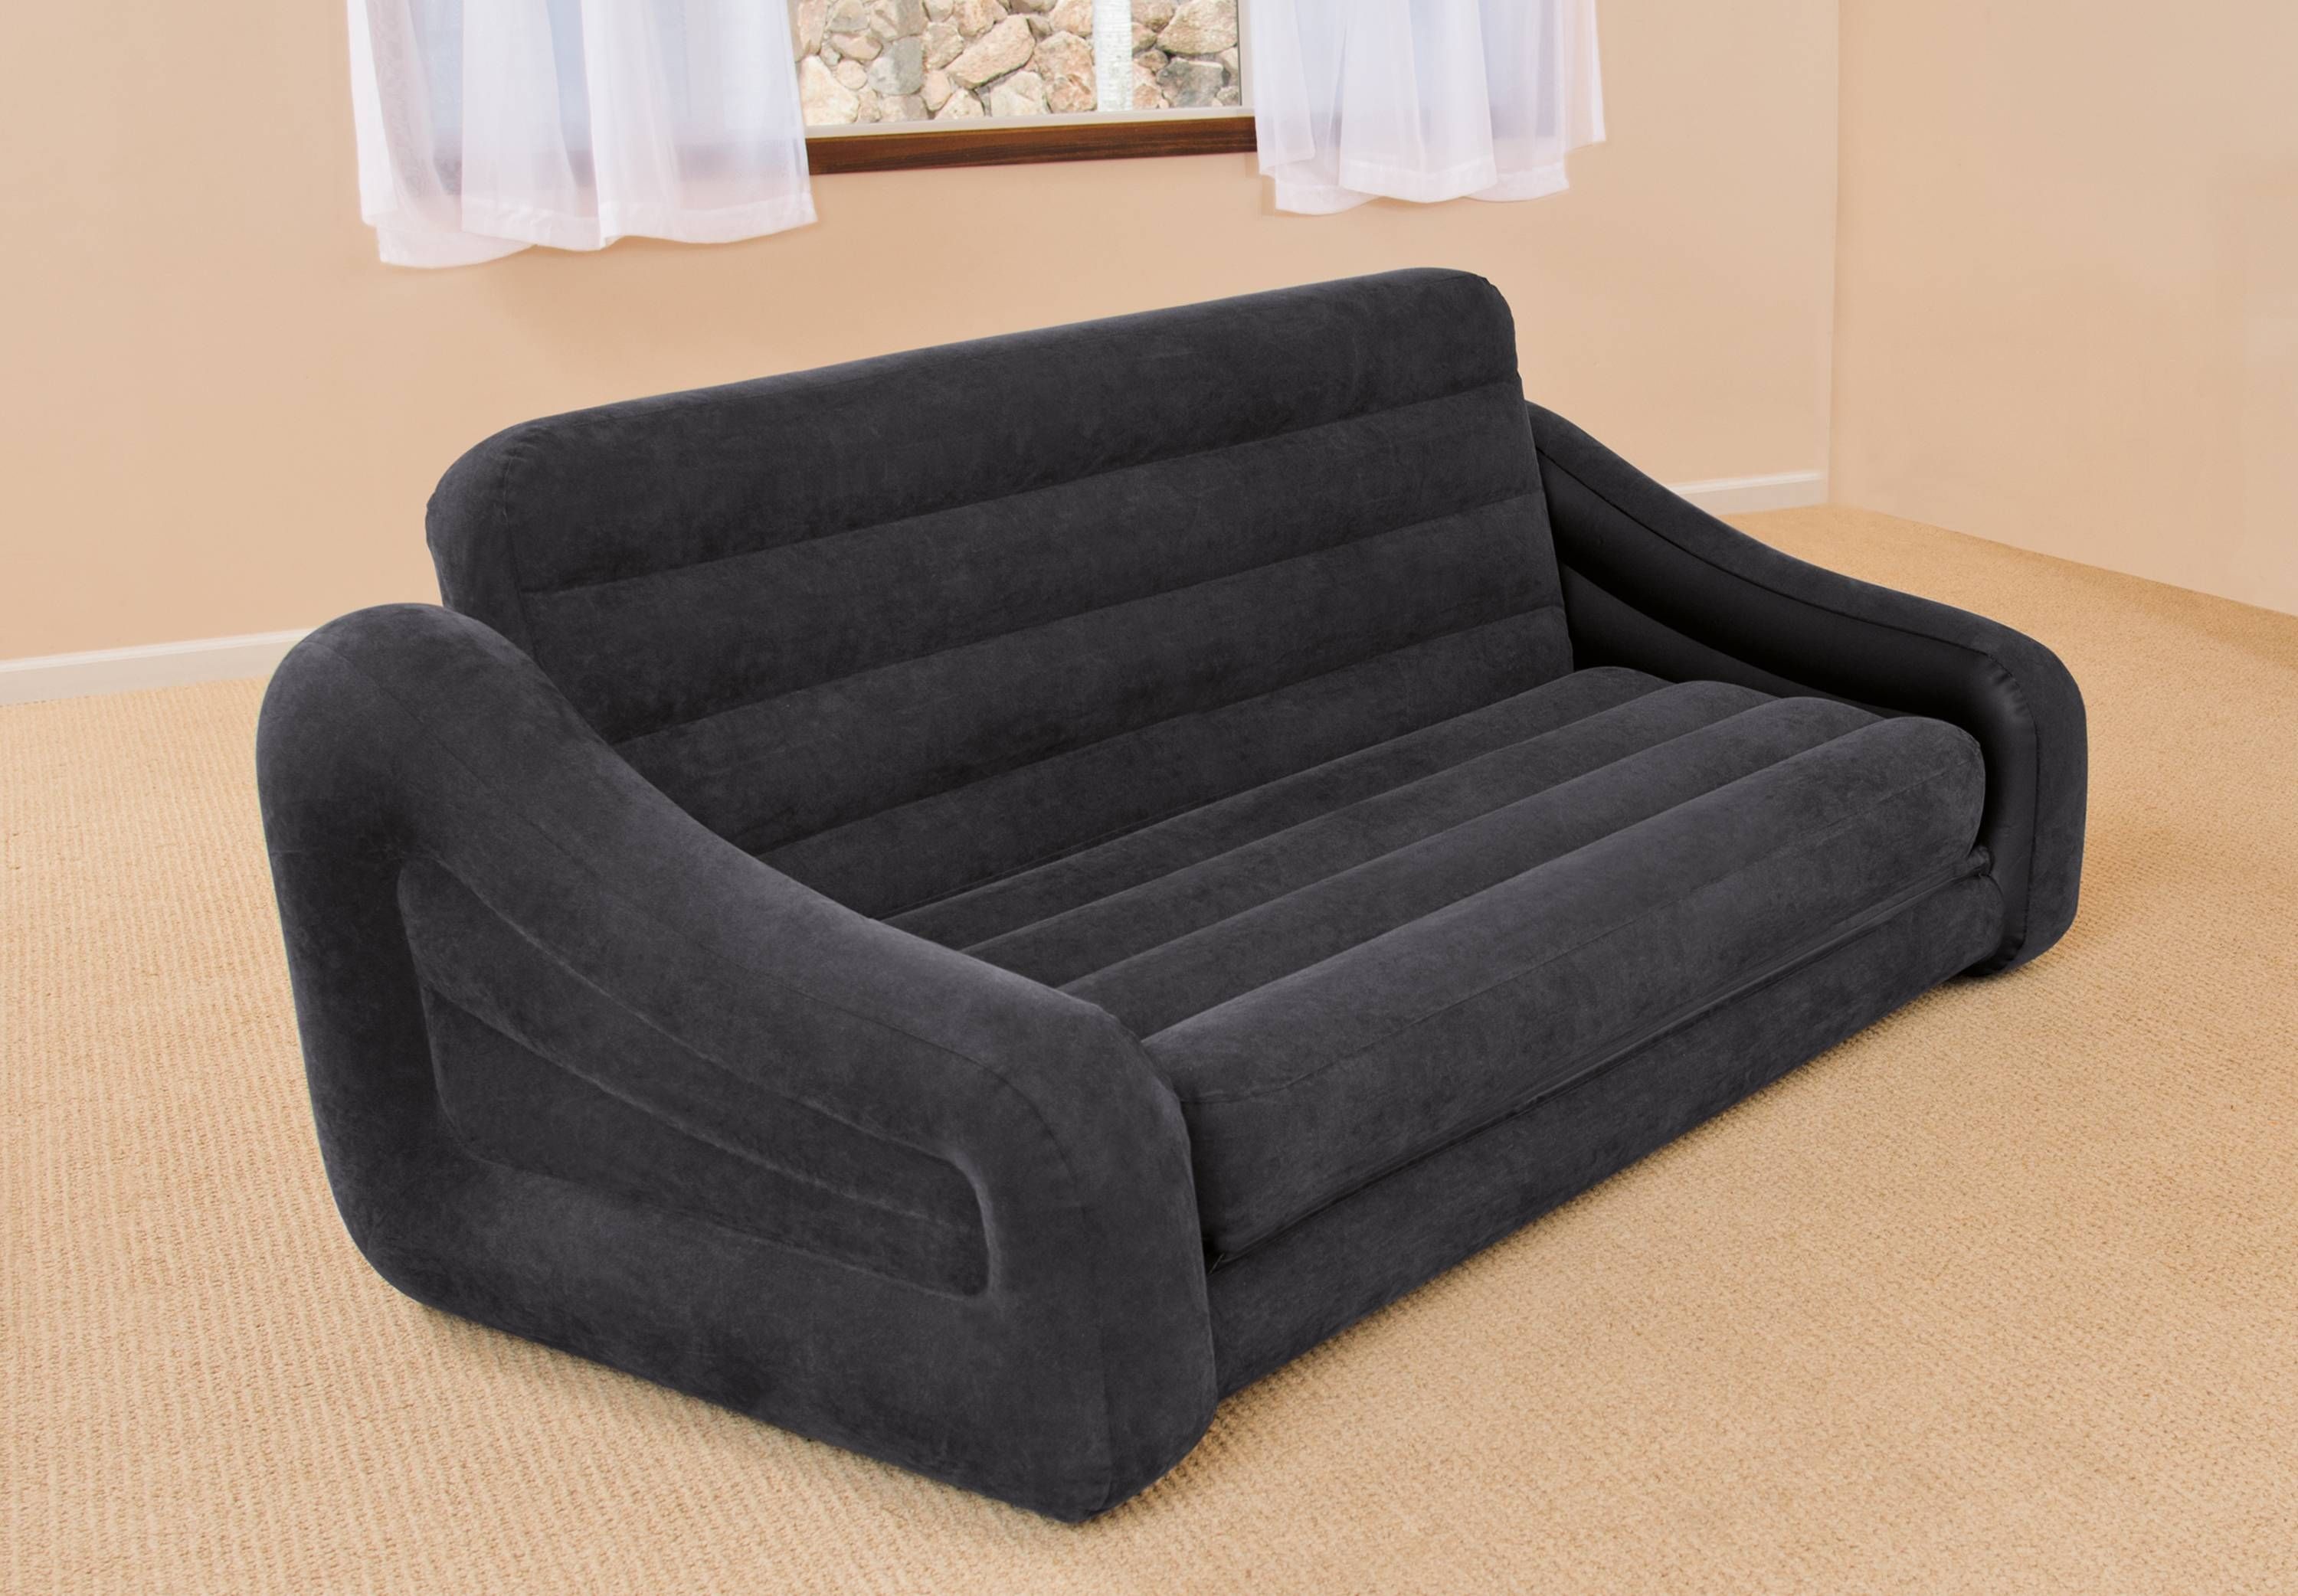 Bedroom: Comfortable Sleeping Solution With Intex Queen Sleeper Throughout Intex Air Couches (View 8 of 15)